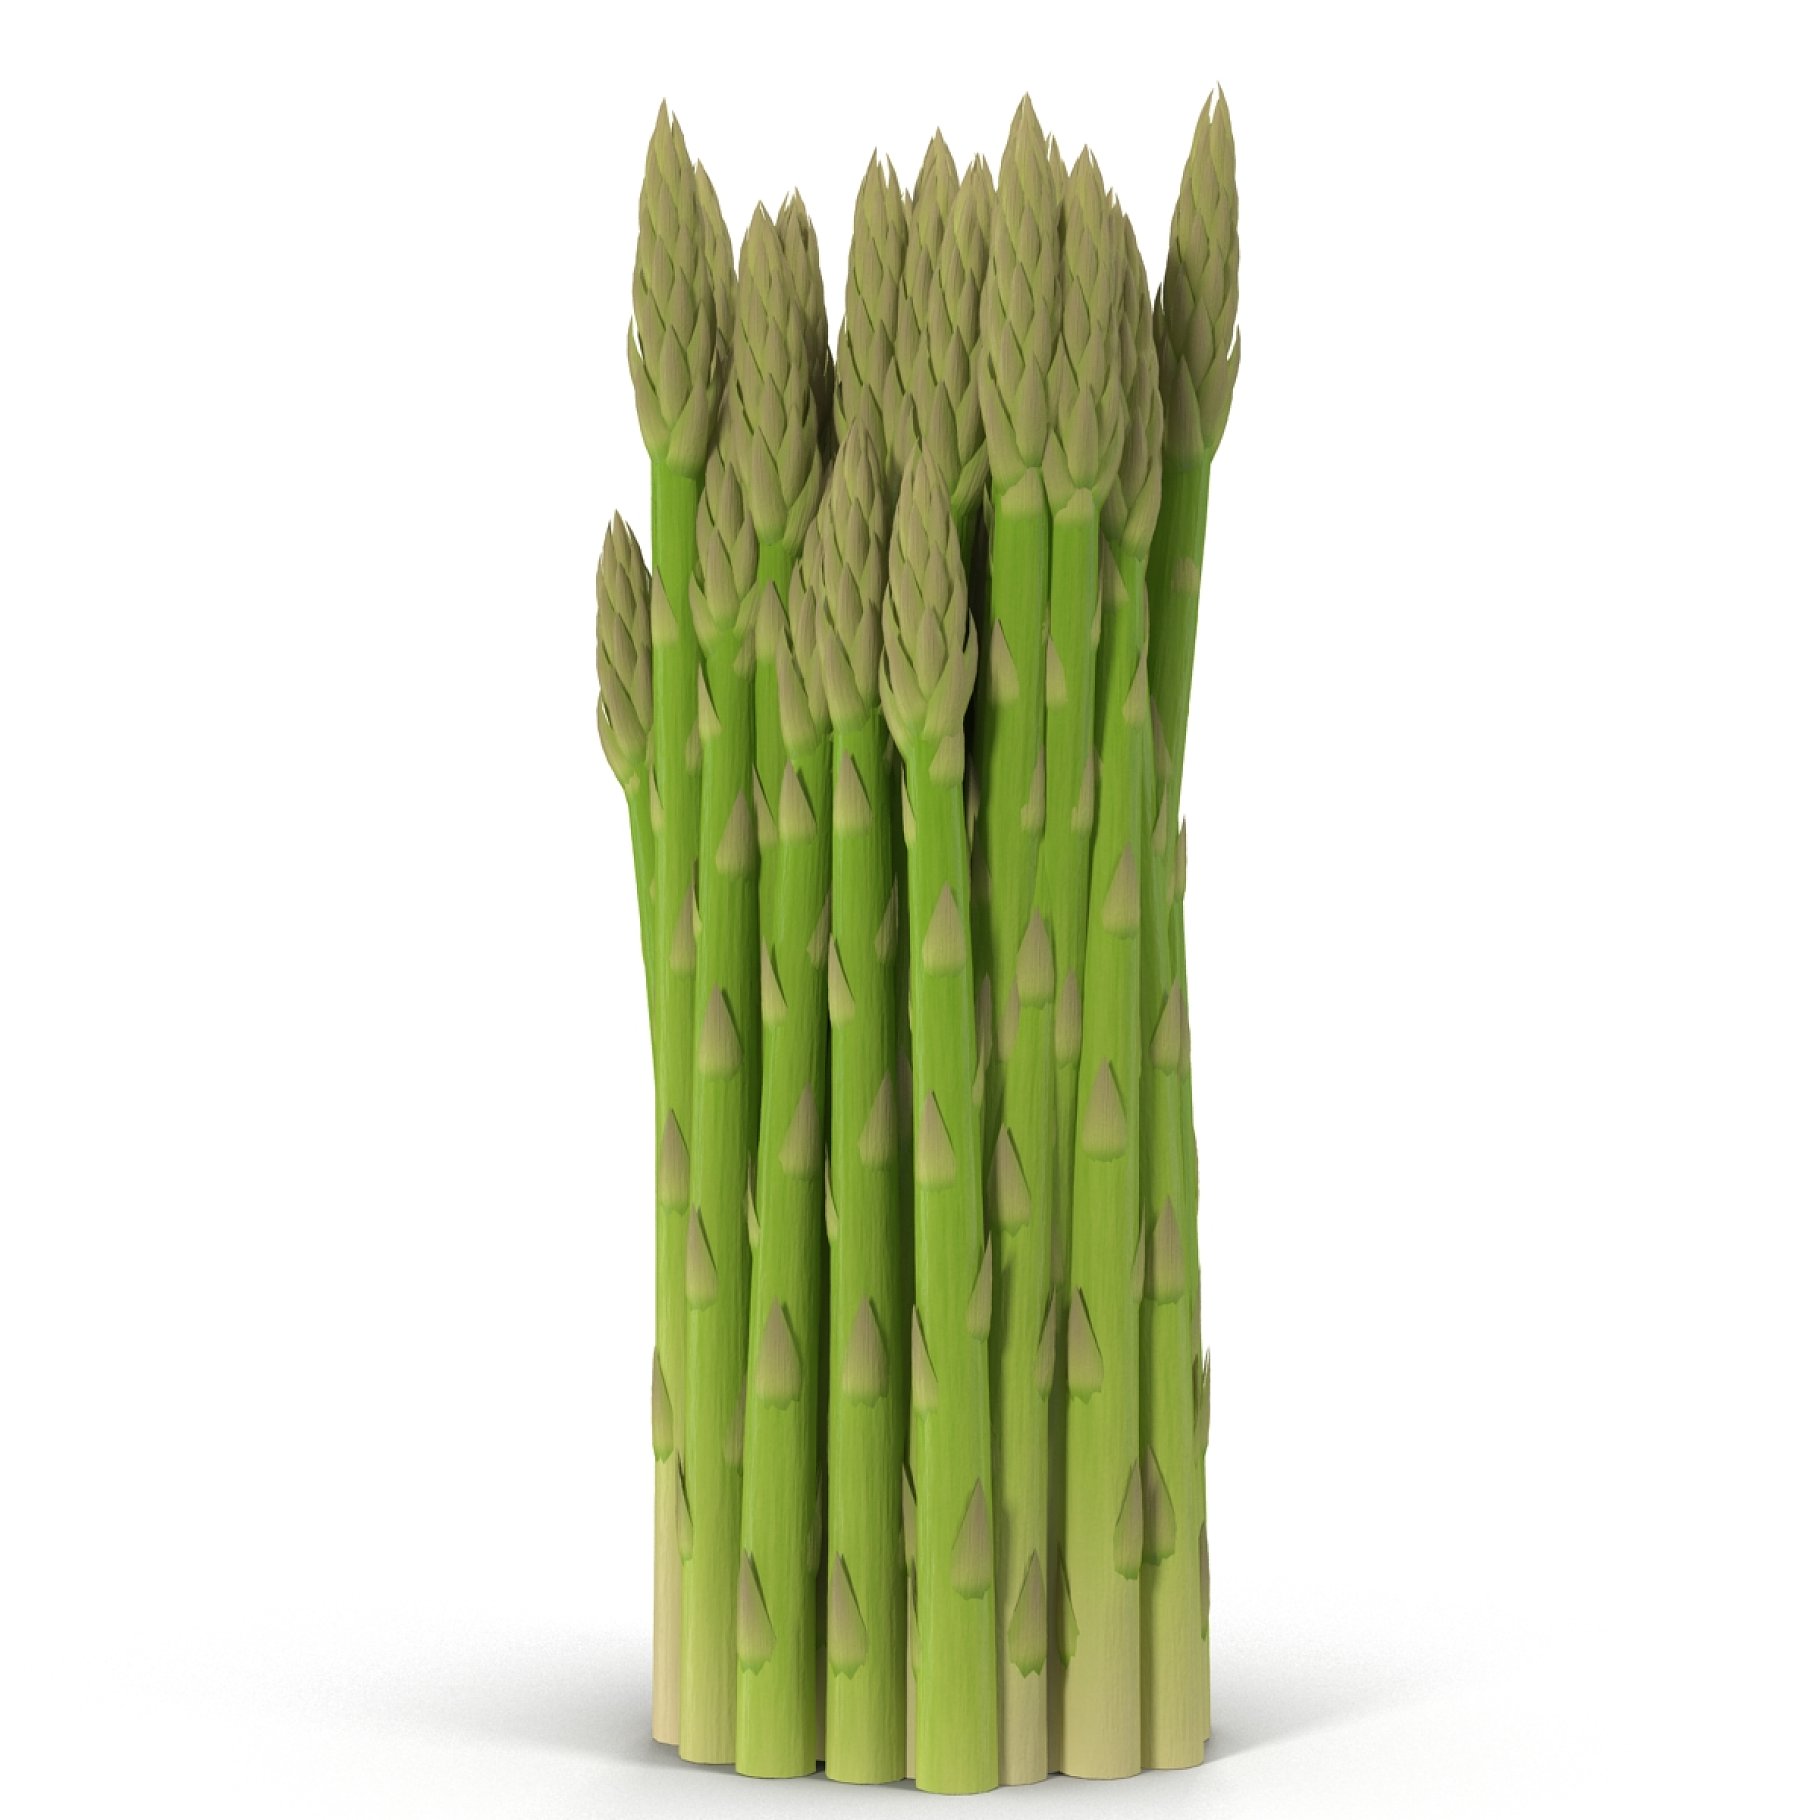 Standing asparagus image.